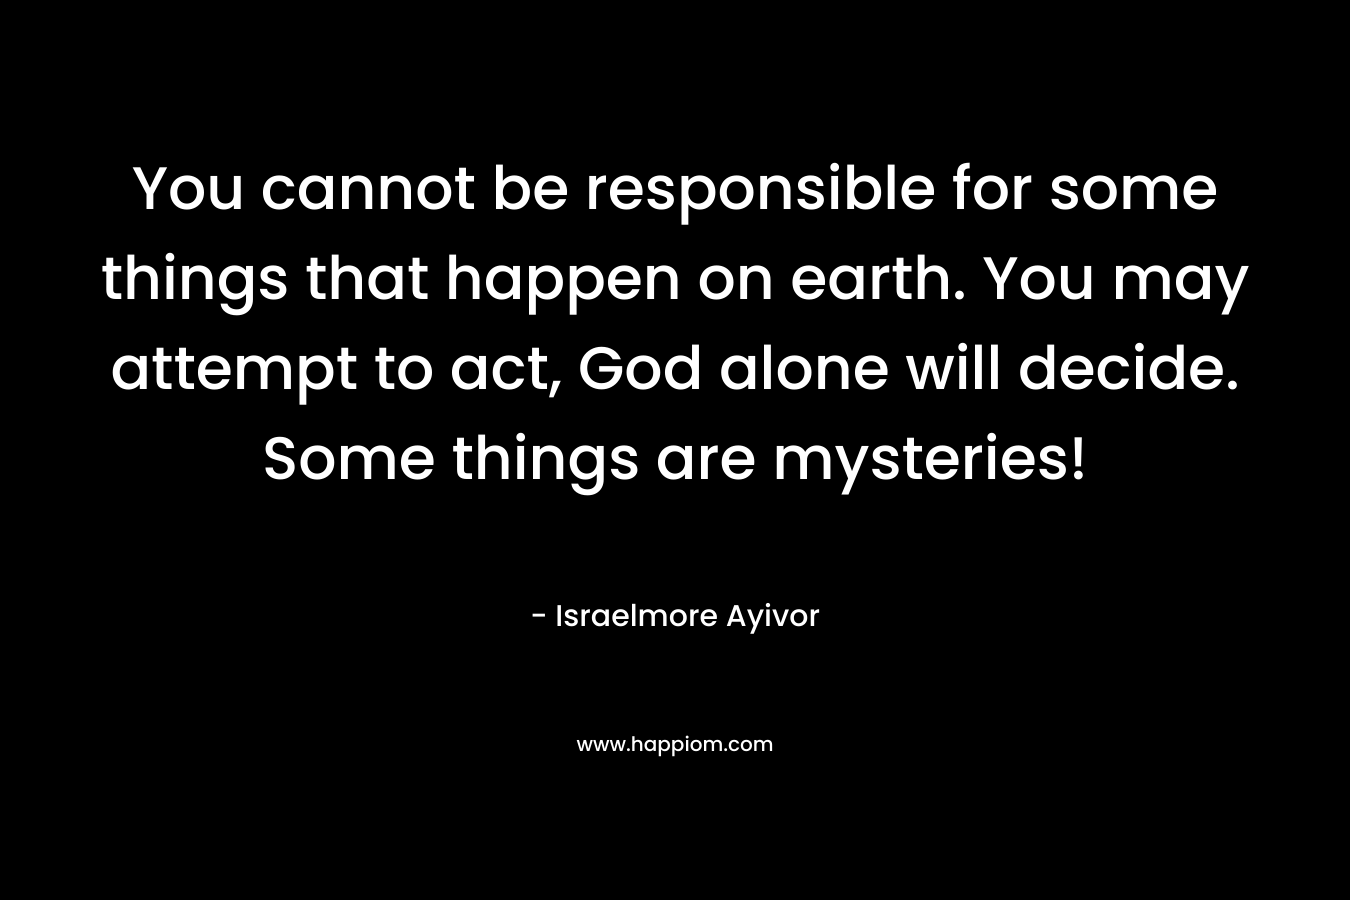 You cannot be responsible for some things that happen on earth. You may attempt to act, God alone will decide. Some things are mysteries!